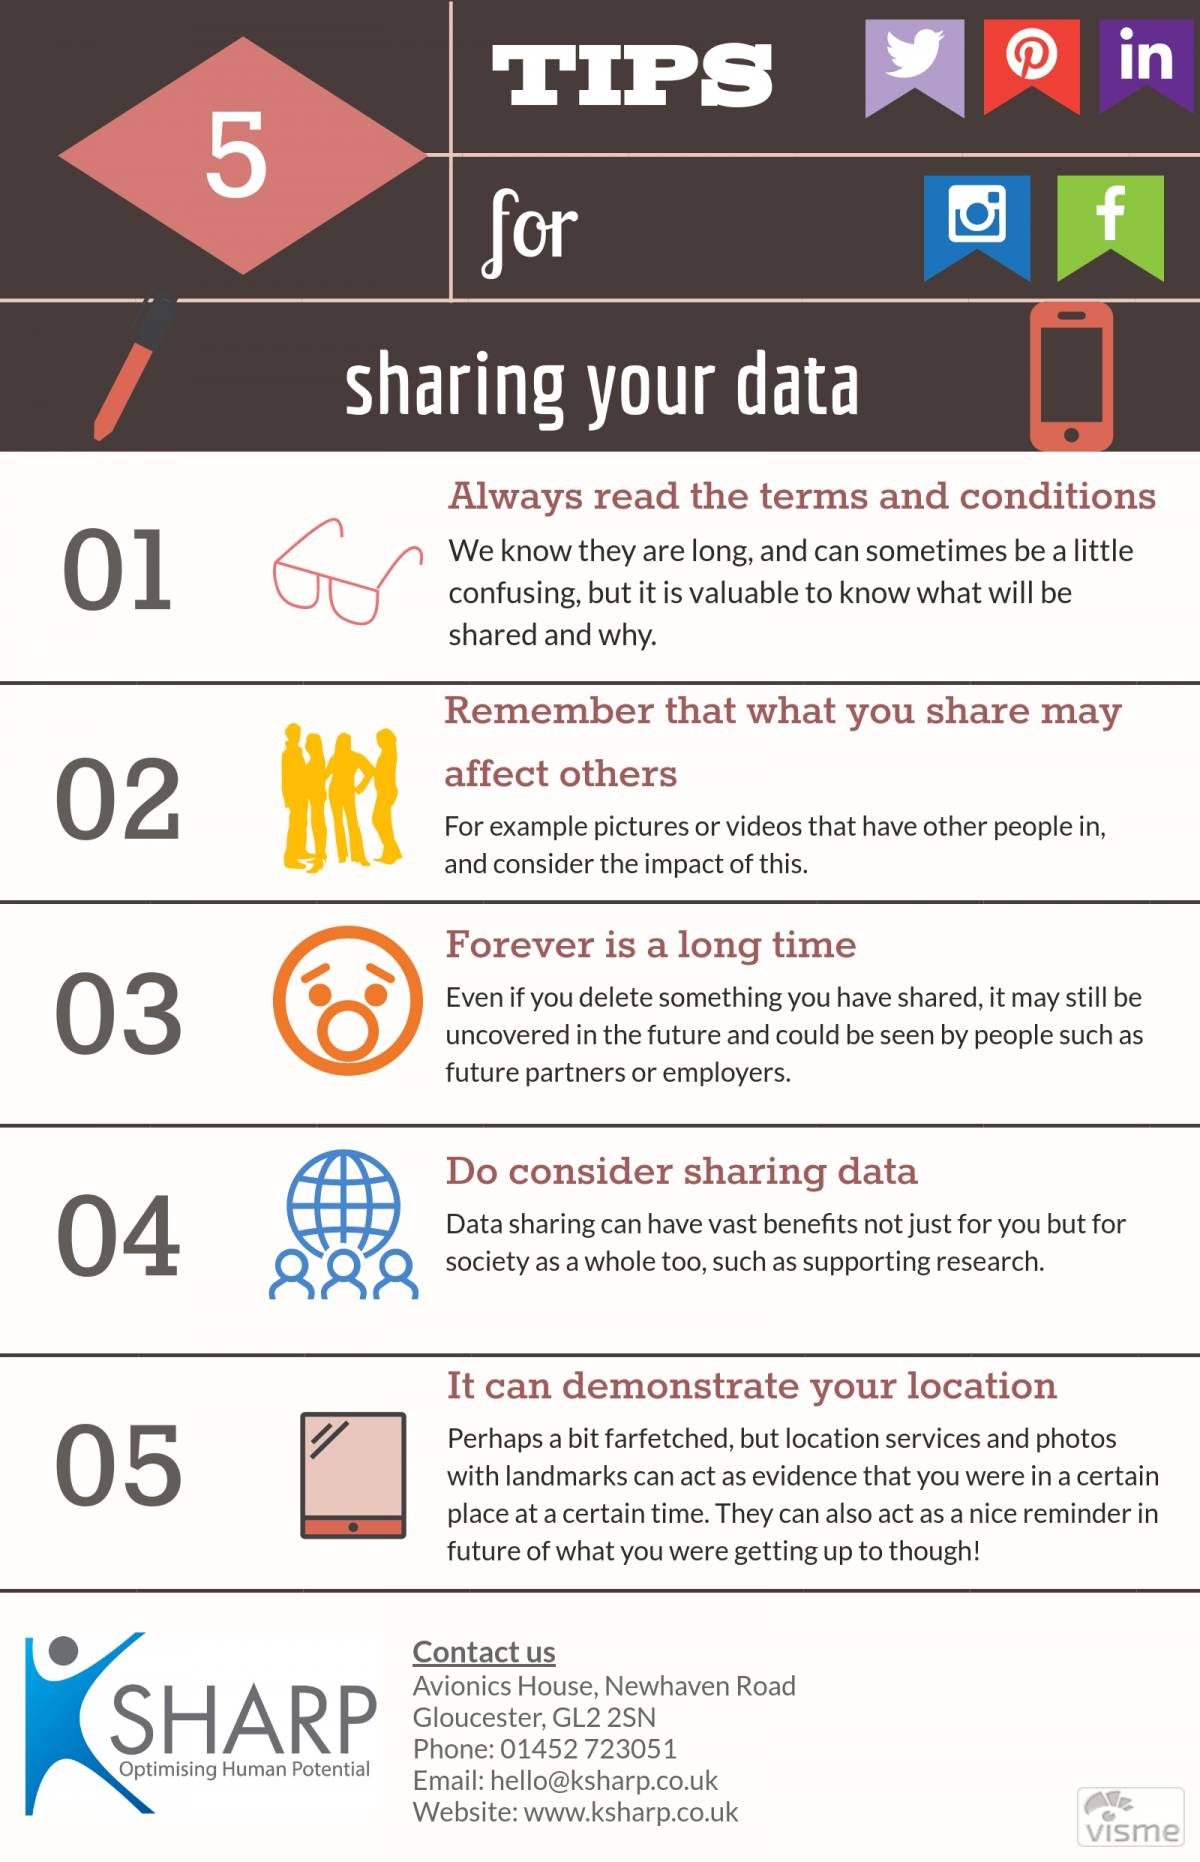 What are the personal impacts of data sharing? Image